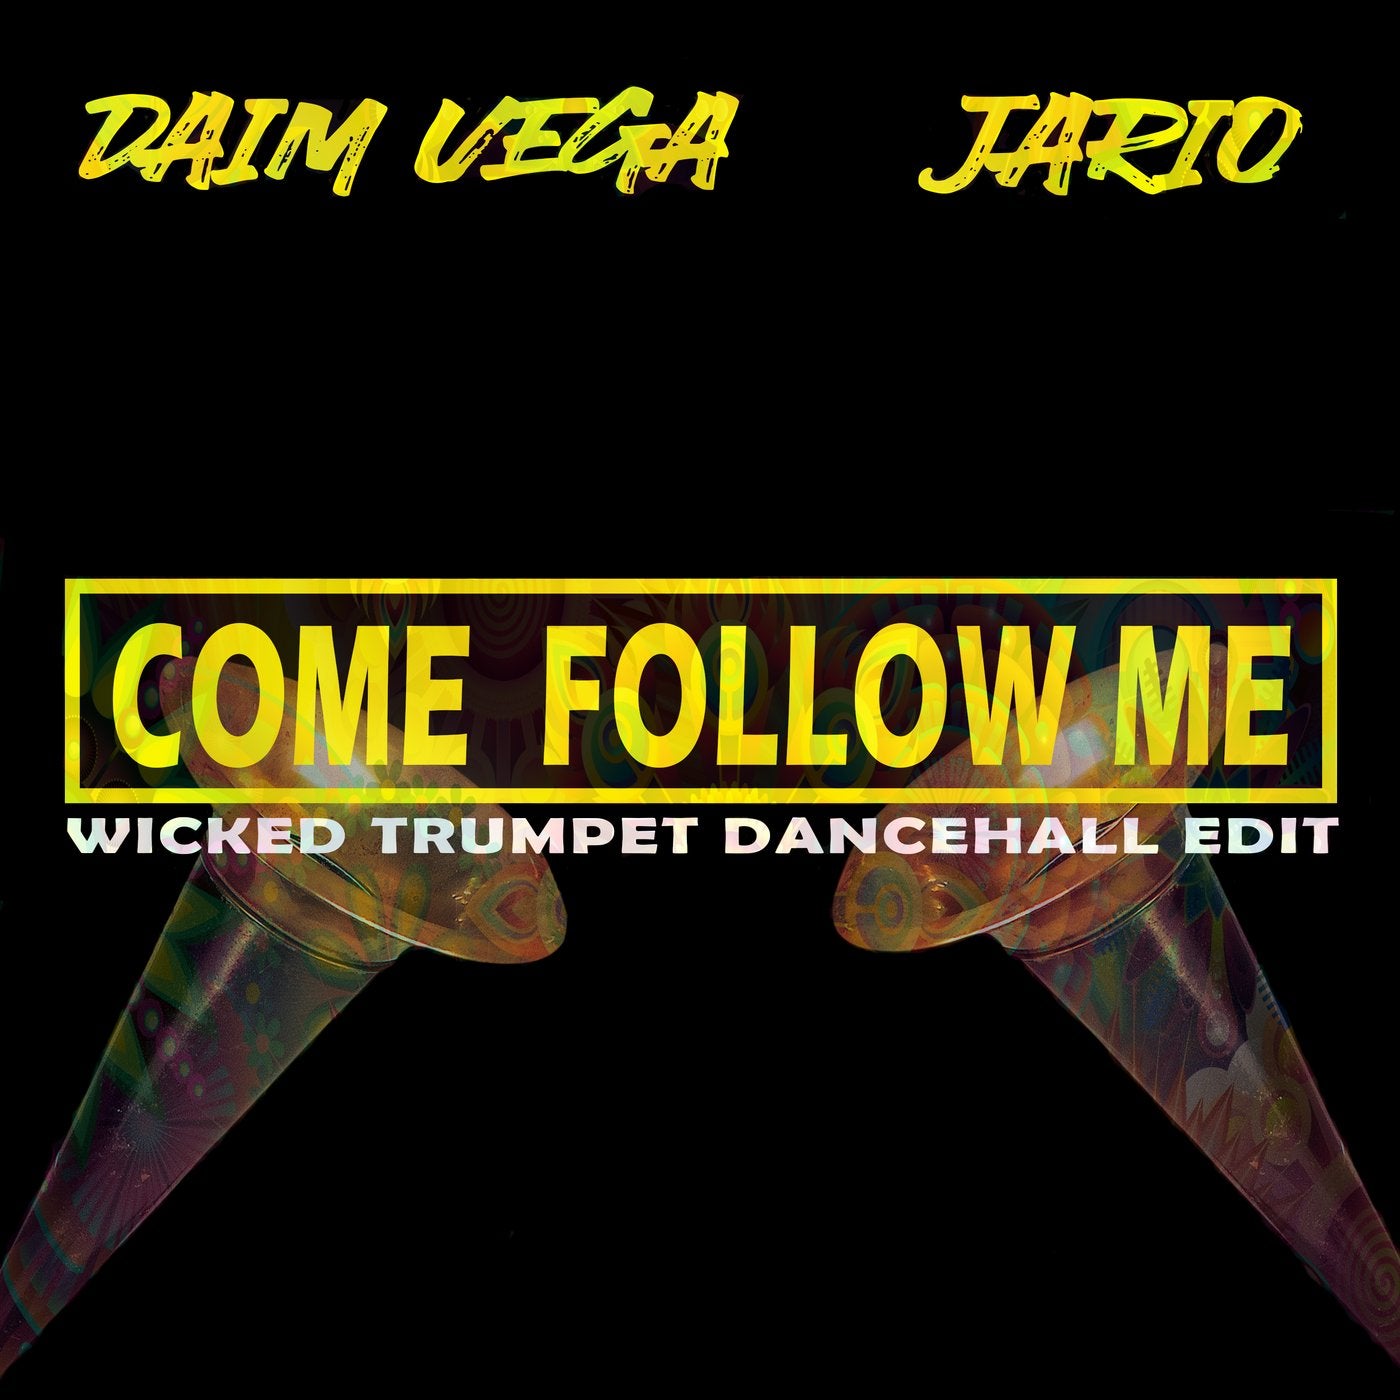 Come Follow Me - Wicked Trumpet Dancehall Edit